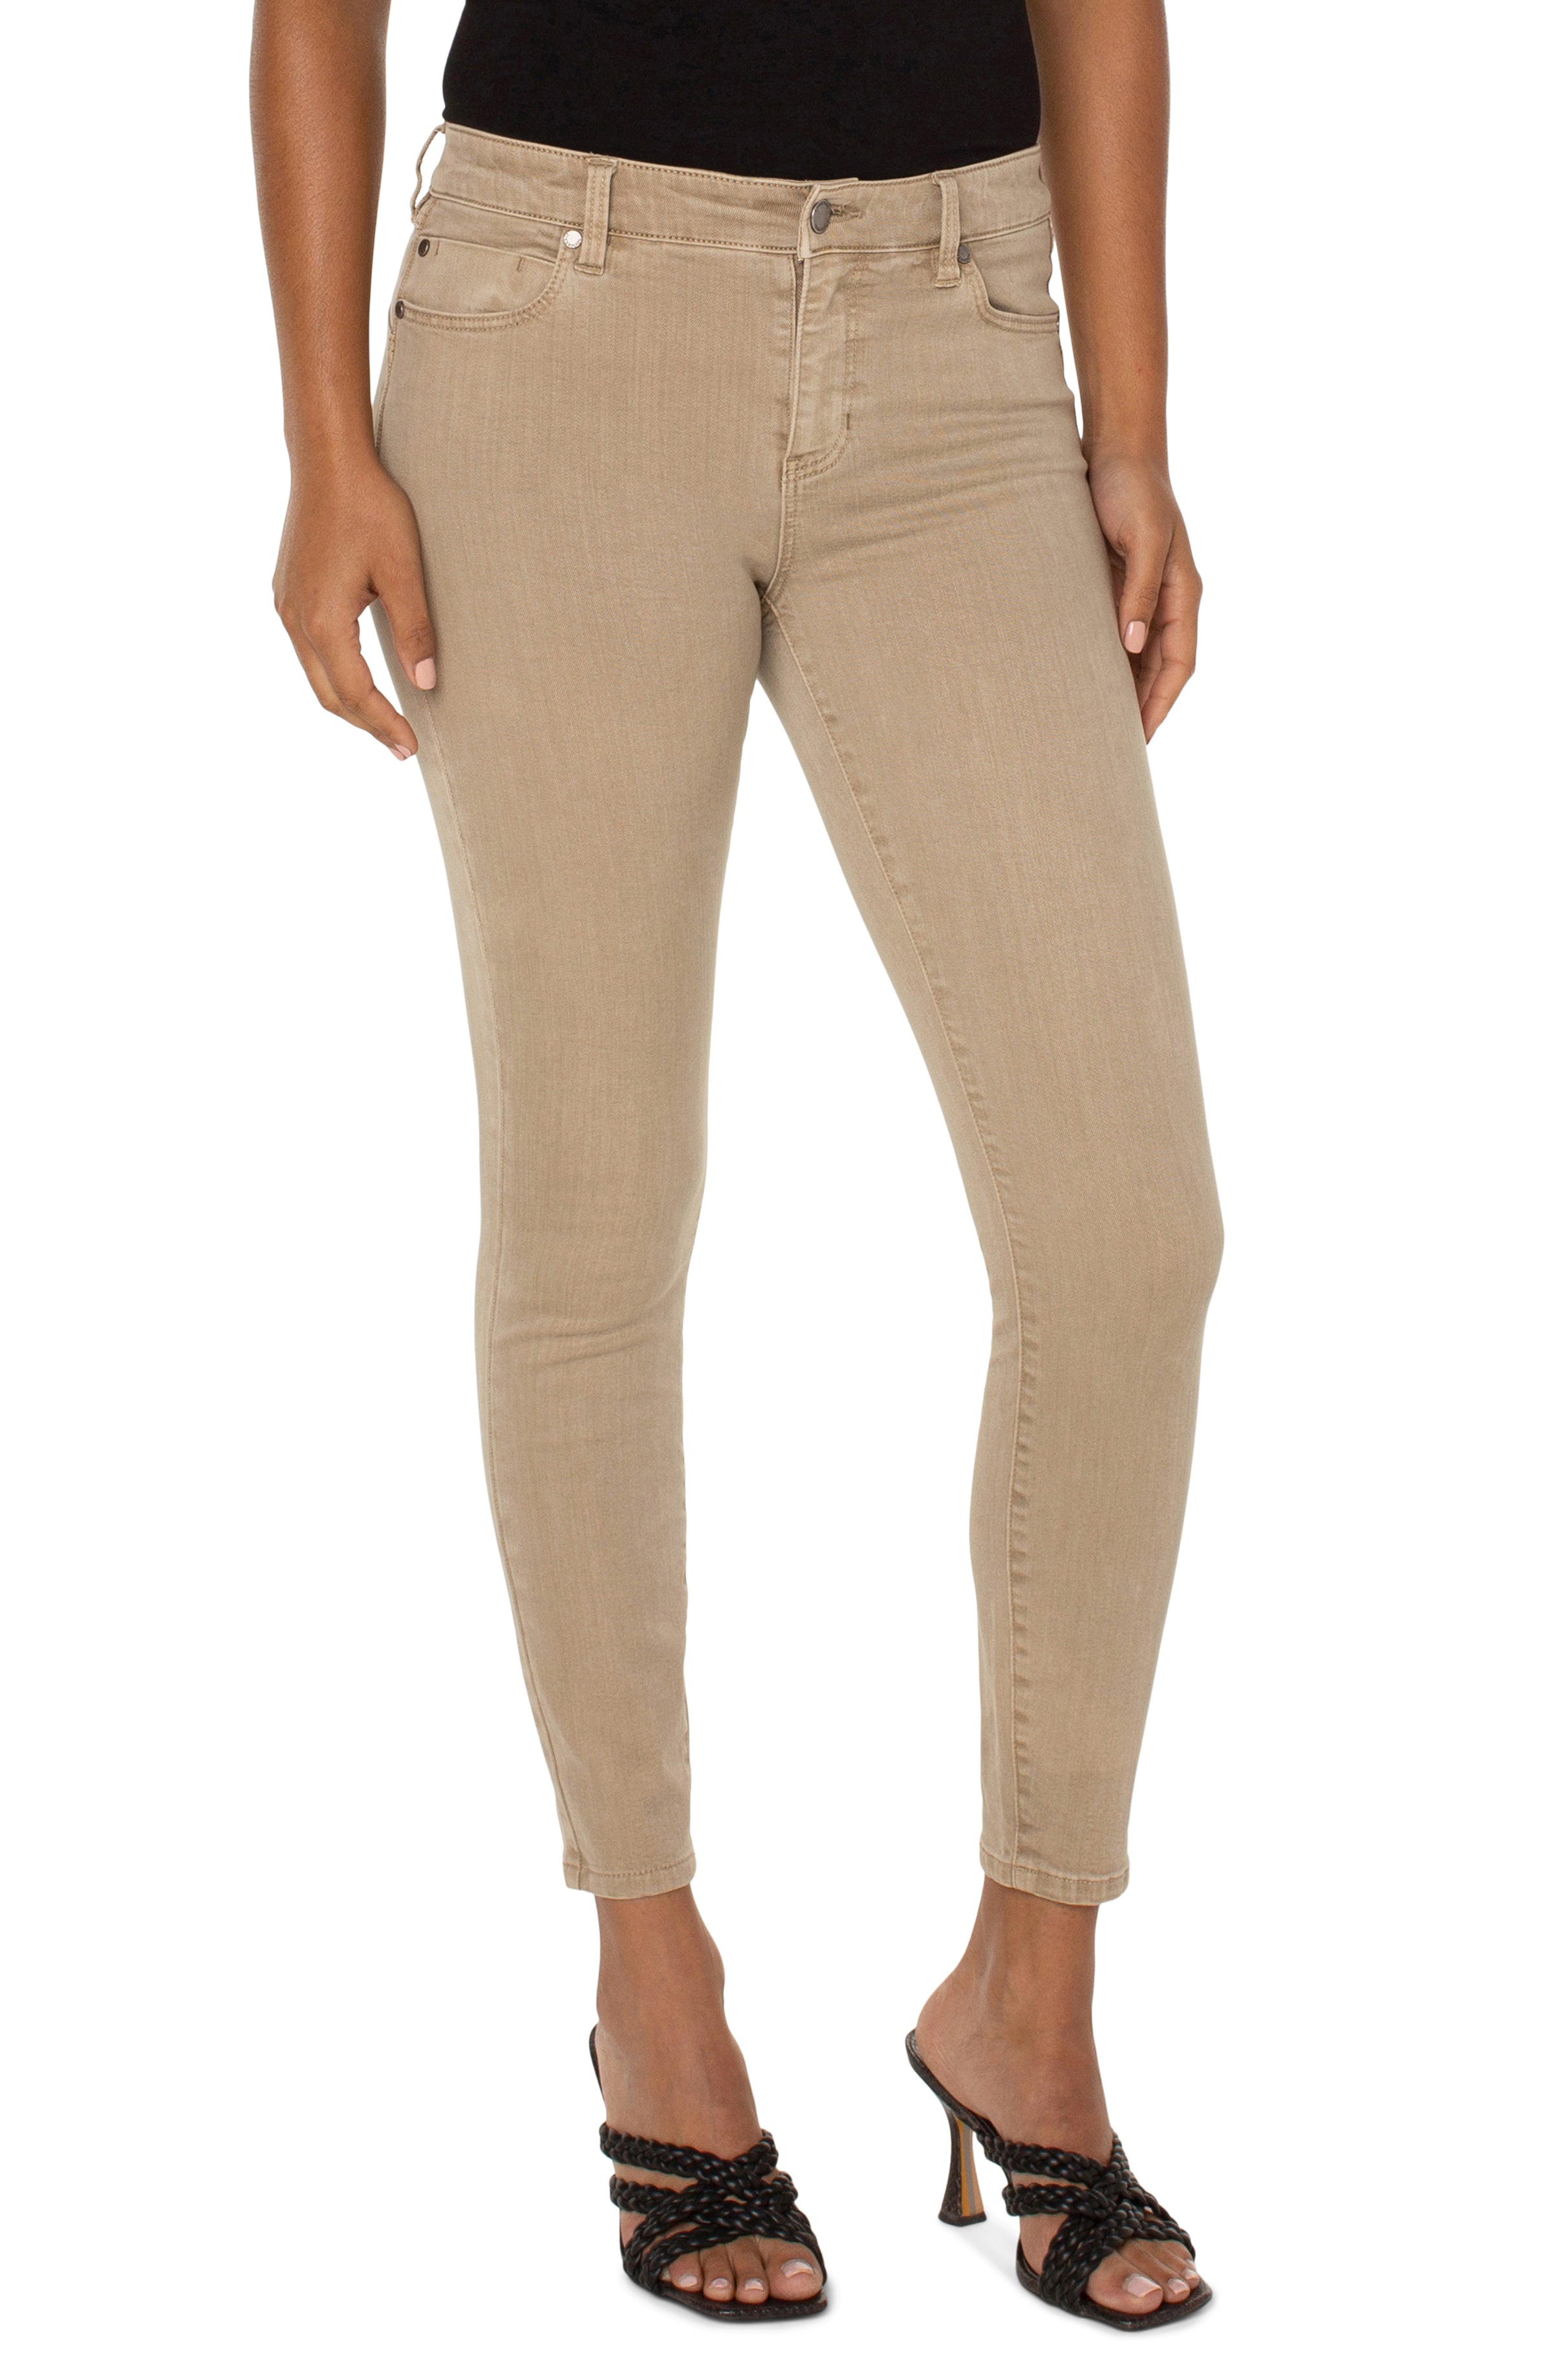 Piper Ankle Skinny - Biscuit Tan